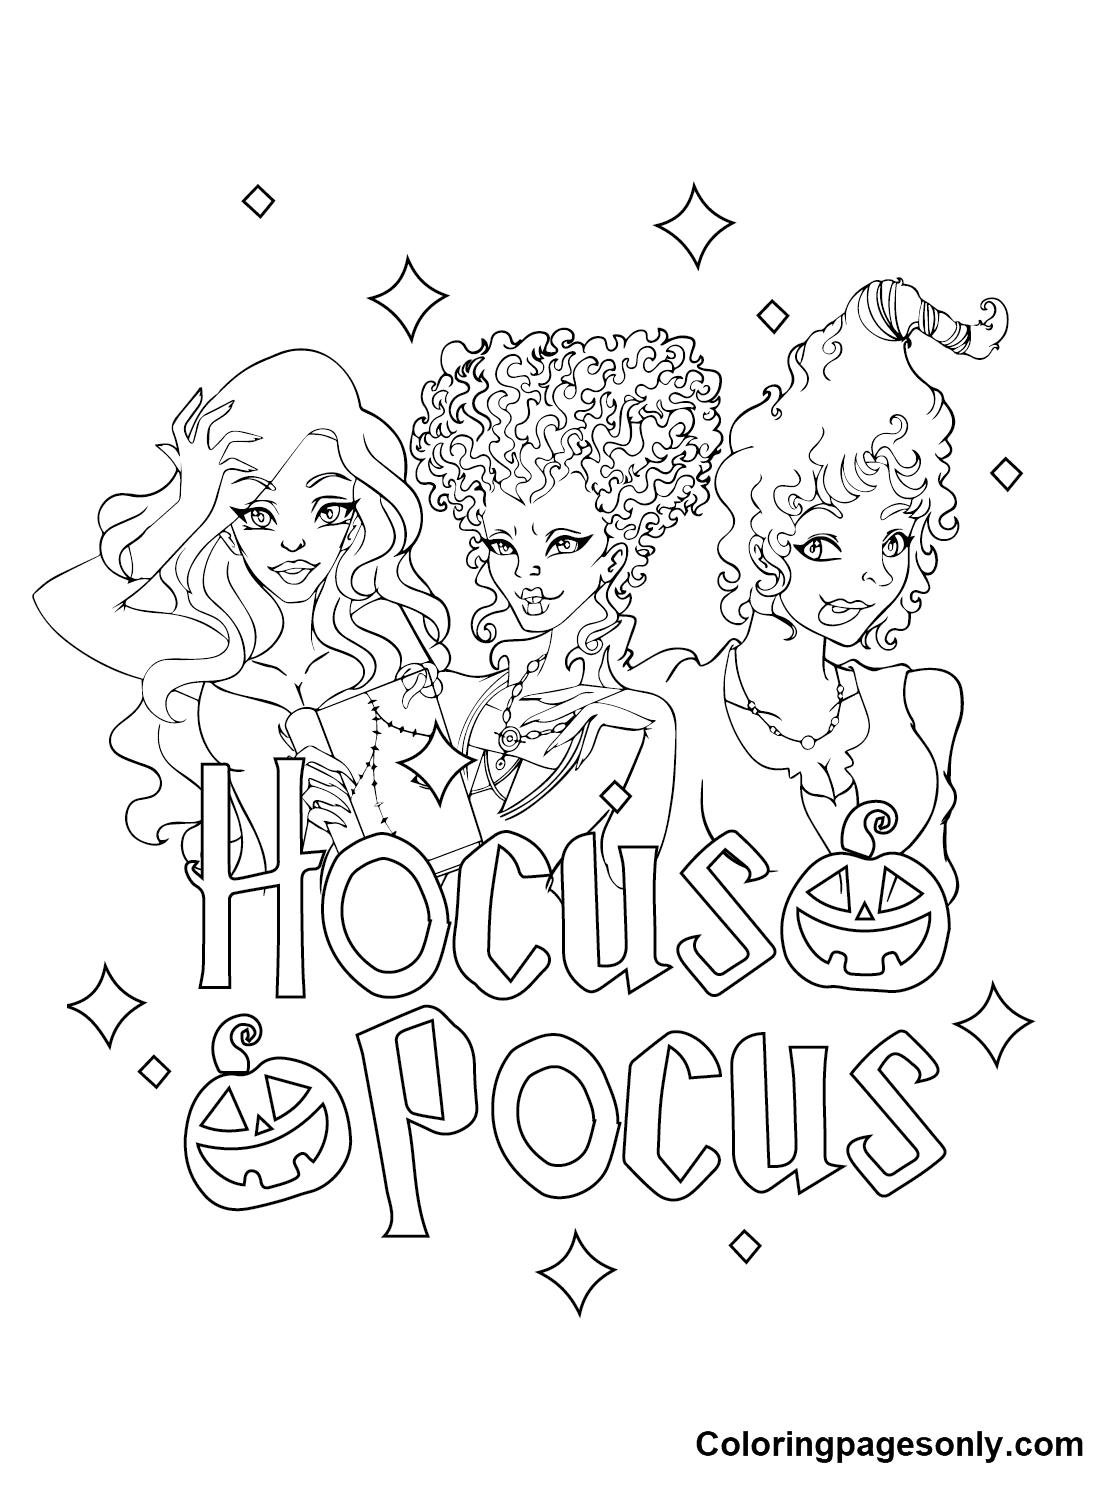 Hocus pocus coloring pages printable for free download